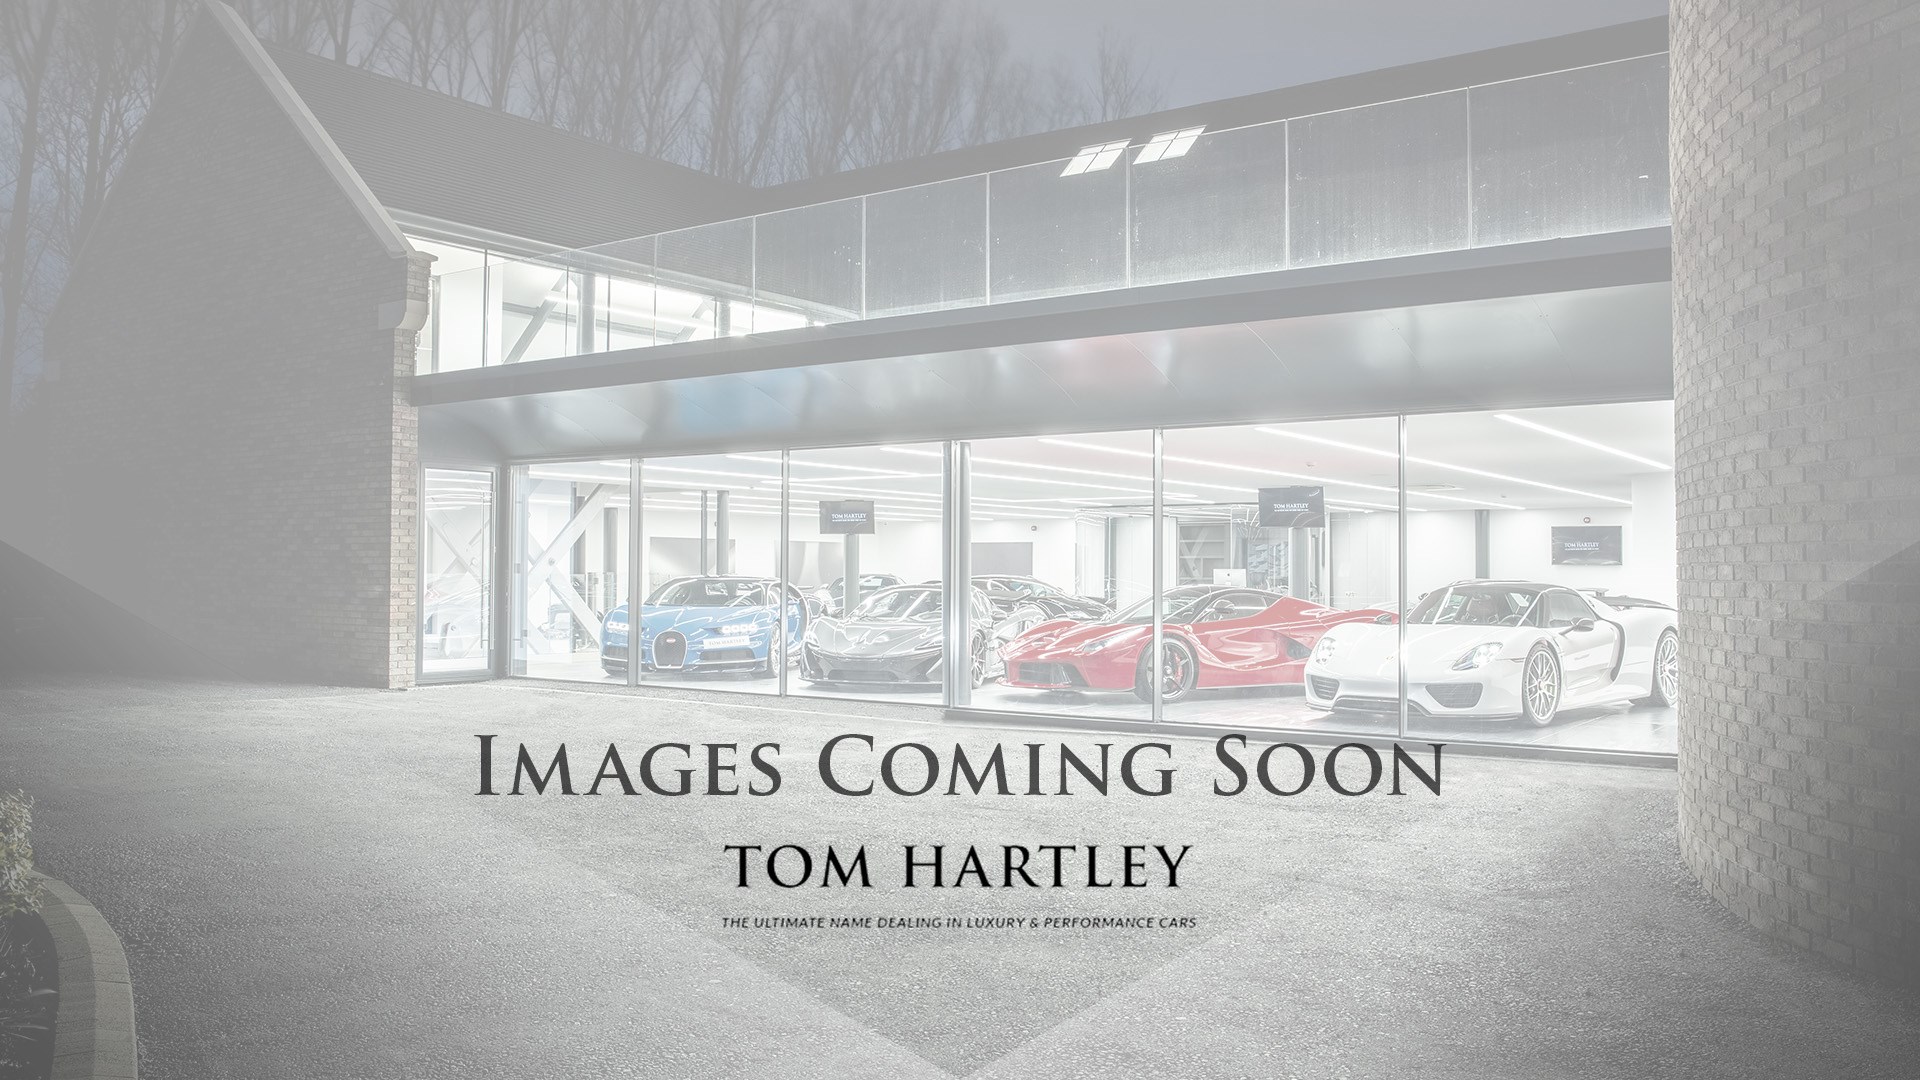 Used 2015 McLaren 650S Le Mans Edition at Tom Hartley